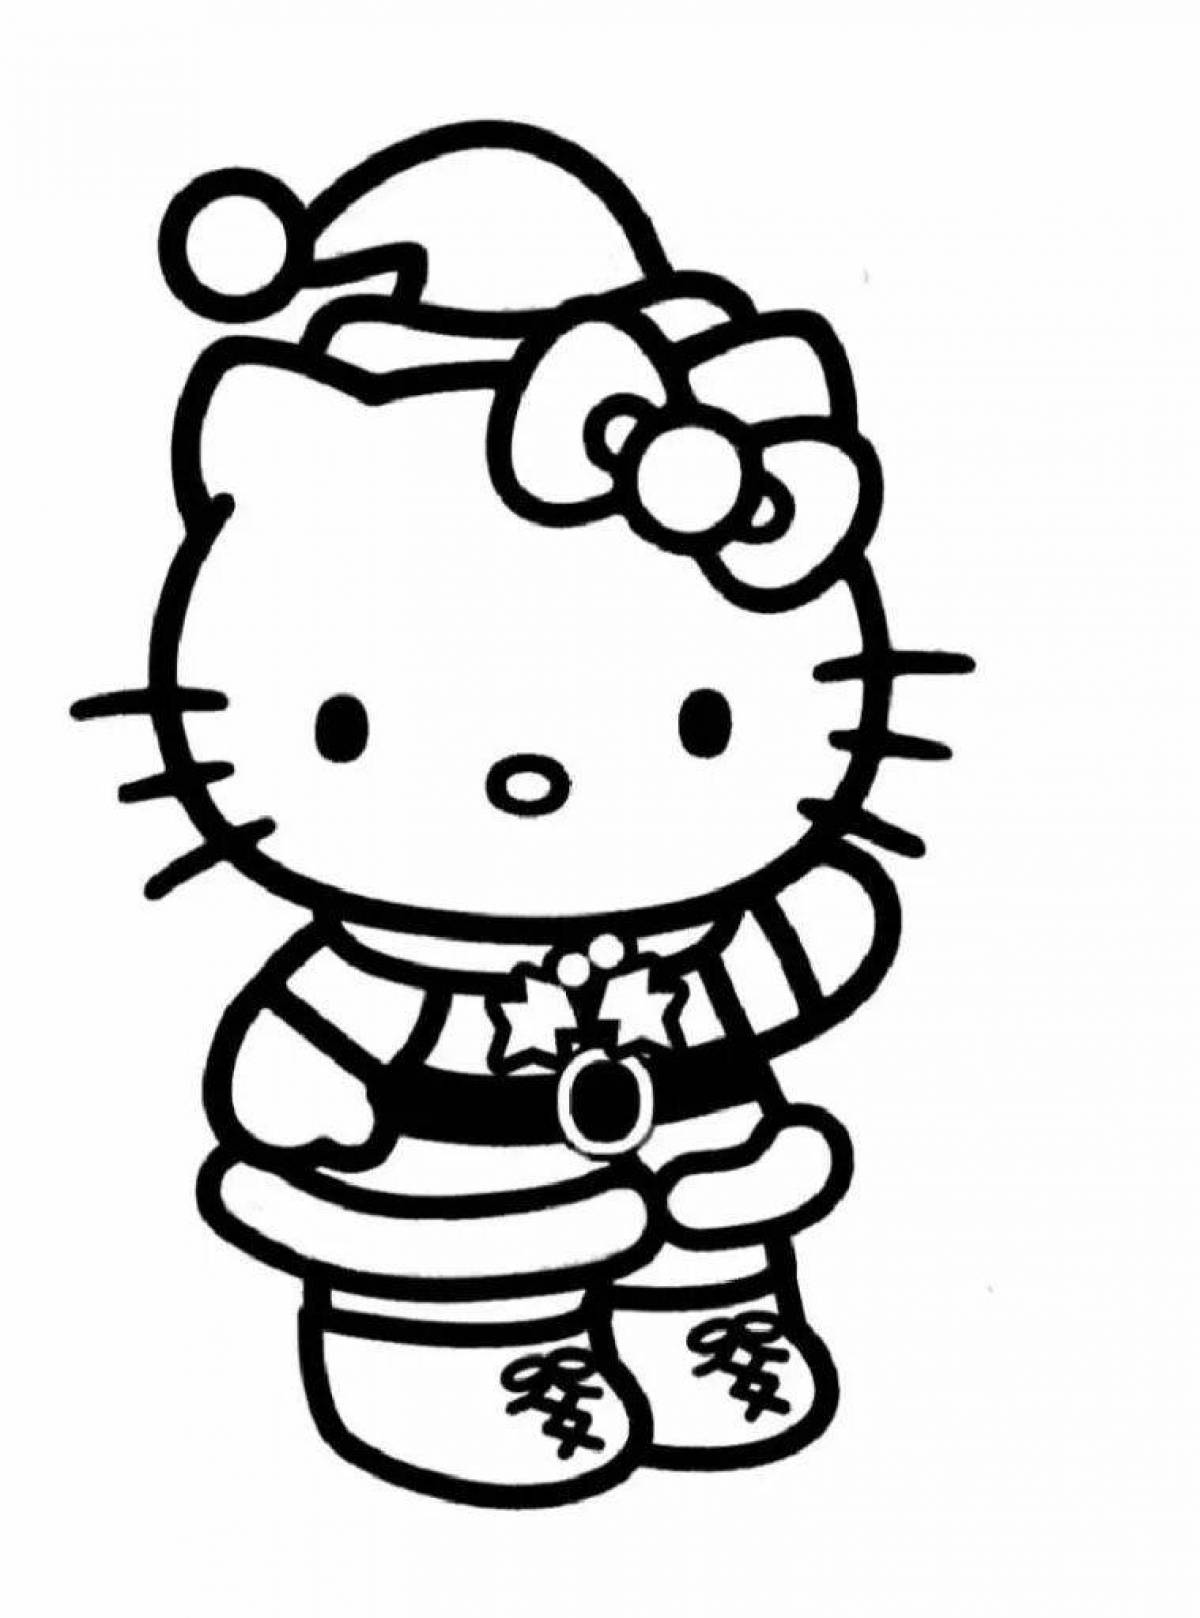 Colorful chicks and hello kitty coloring book